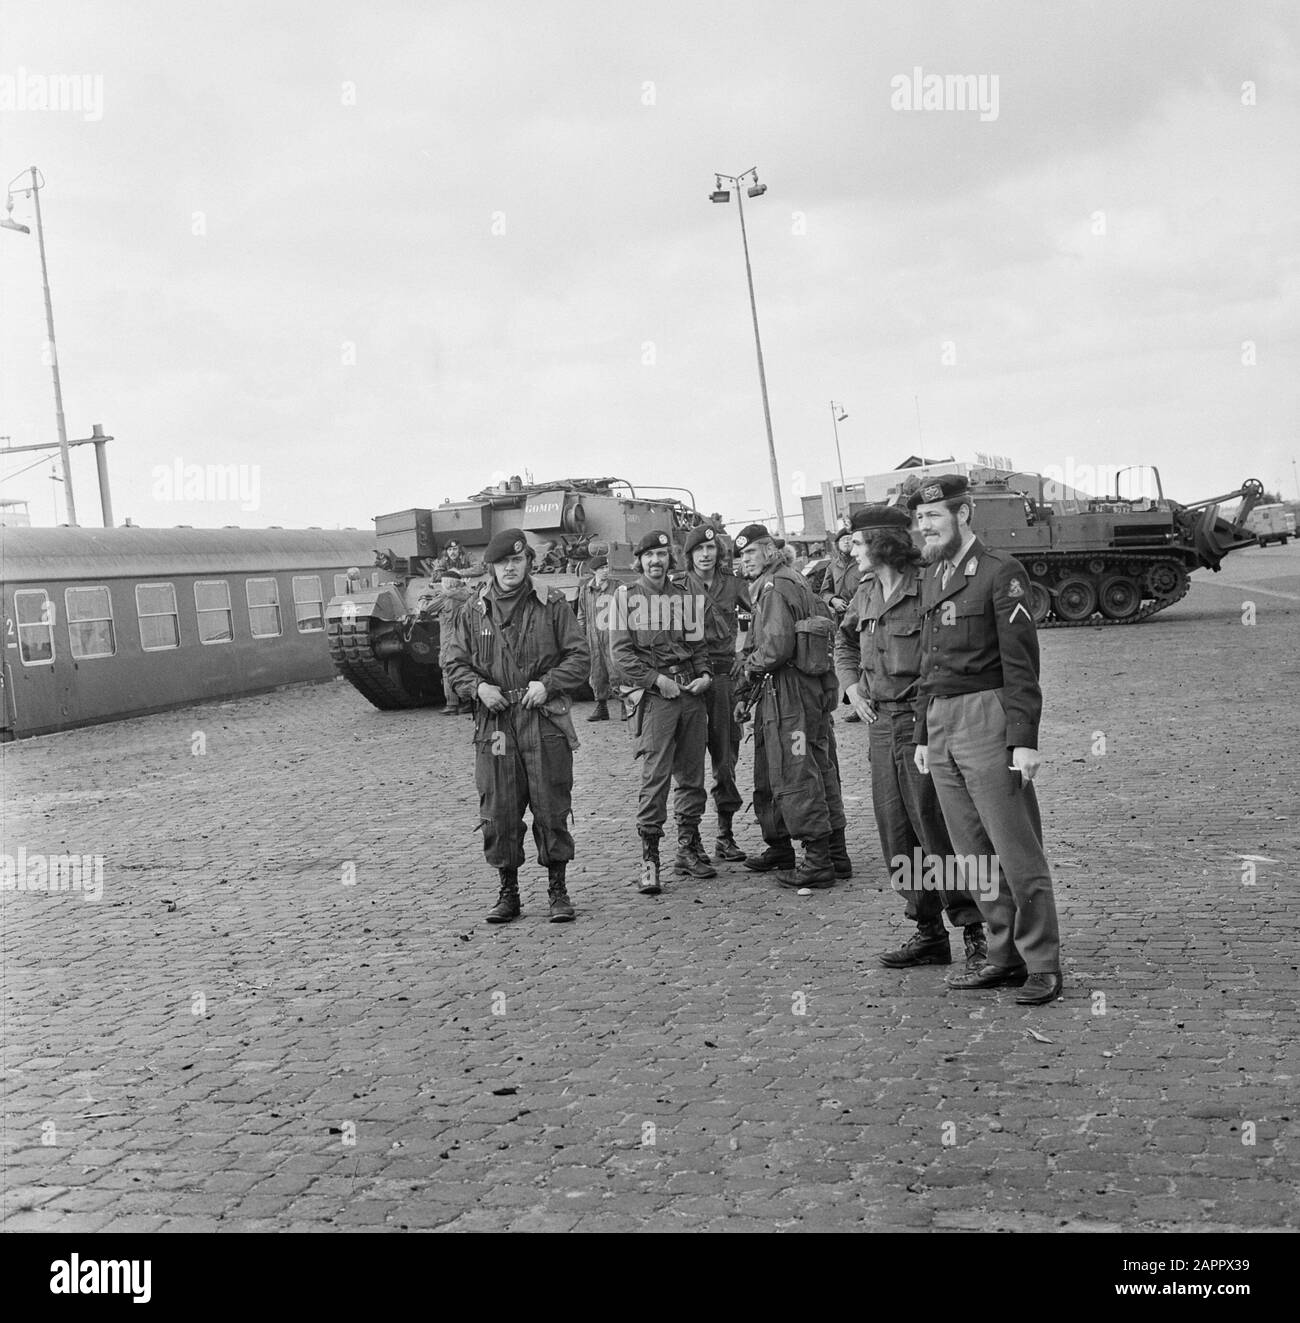 Escadrons tanks depart from station Amersfoort for gr exercise Big Ferro in West Germany Date: September 10, 1973 Location: Amersfoort Keywords: MITARY, TANKS, exercises, stations Personal name: Big Ferro Stock Photo